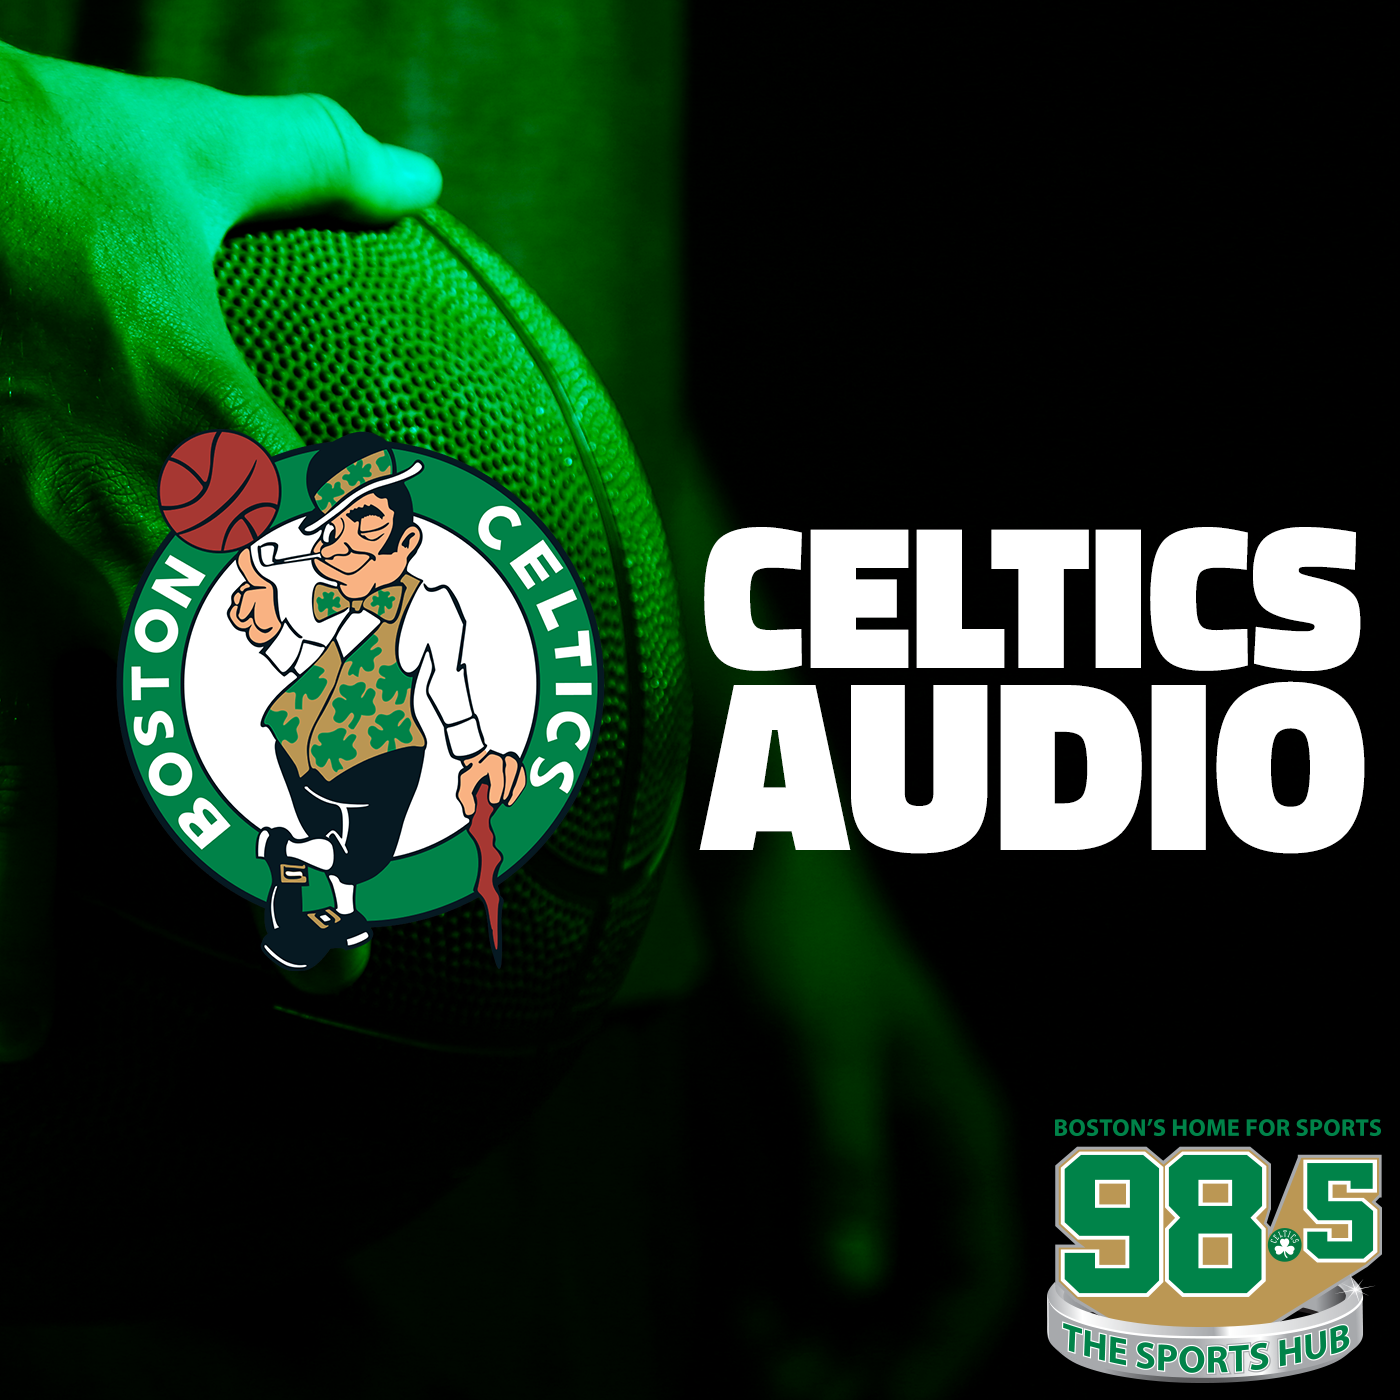 Jrue Holiday joins Grande and Max after the Celtics 114-94 win over the Miami Heat